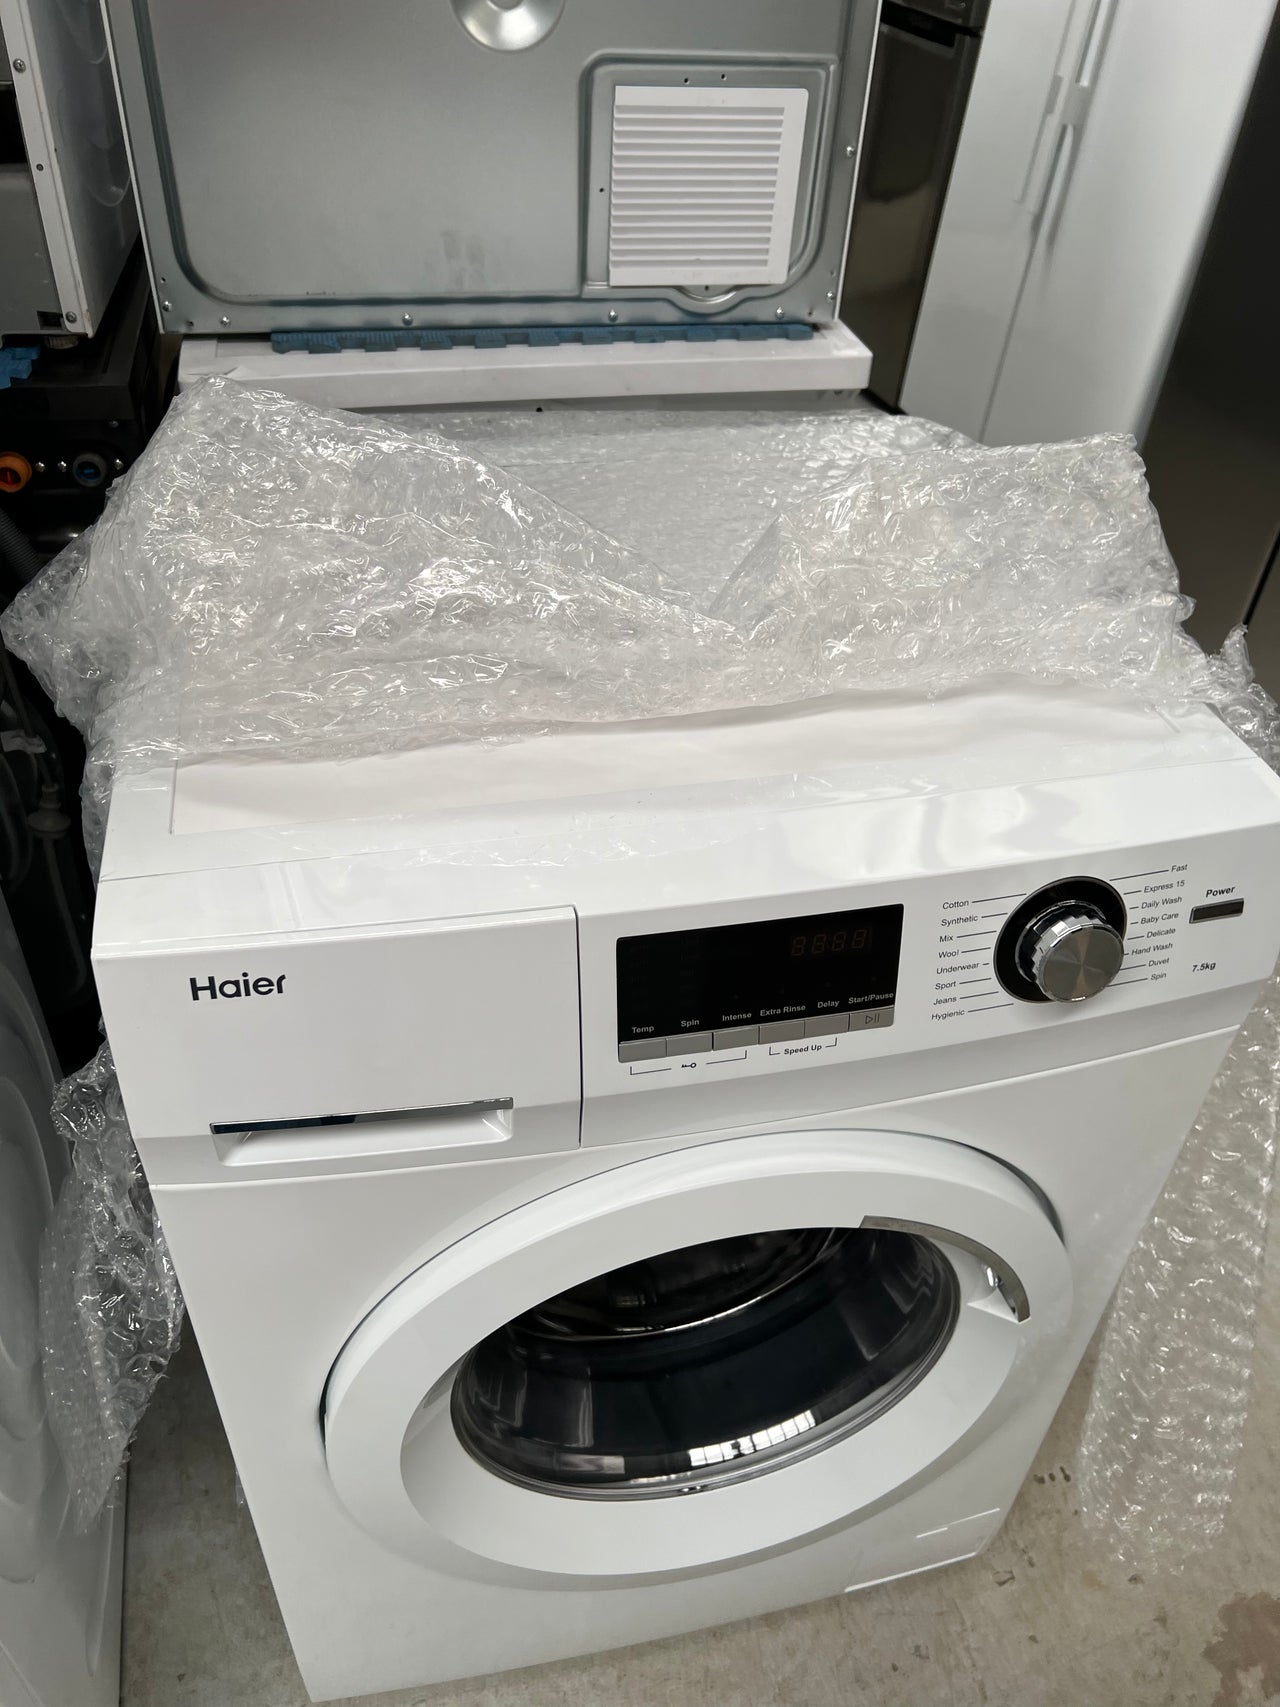 Factory second Haier HWF75AW1 7.5 kg Front Load Washing Machine - Second Hand Appliances Geebung